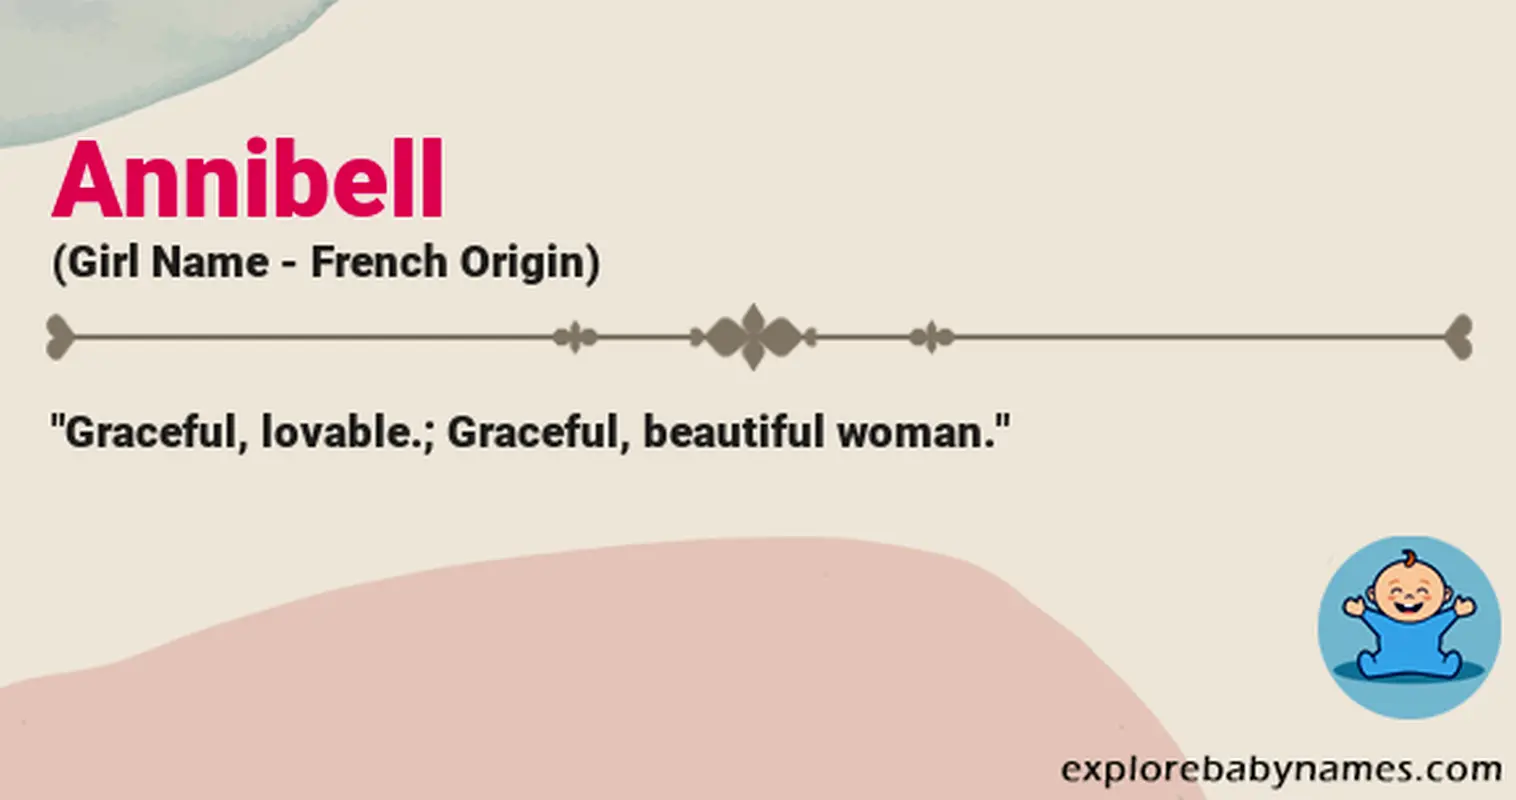 Meaning of Annibell